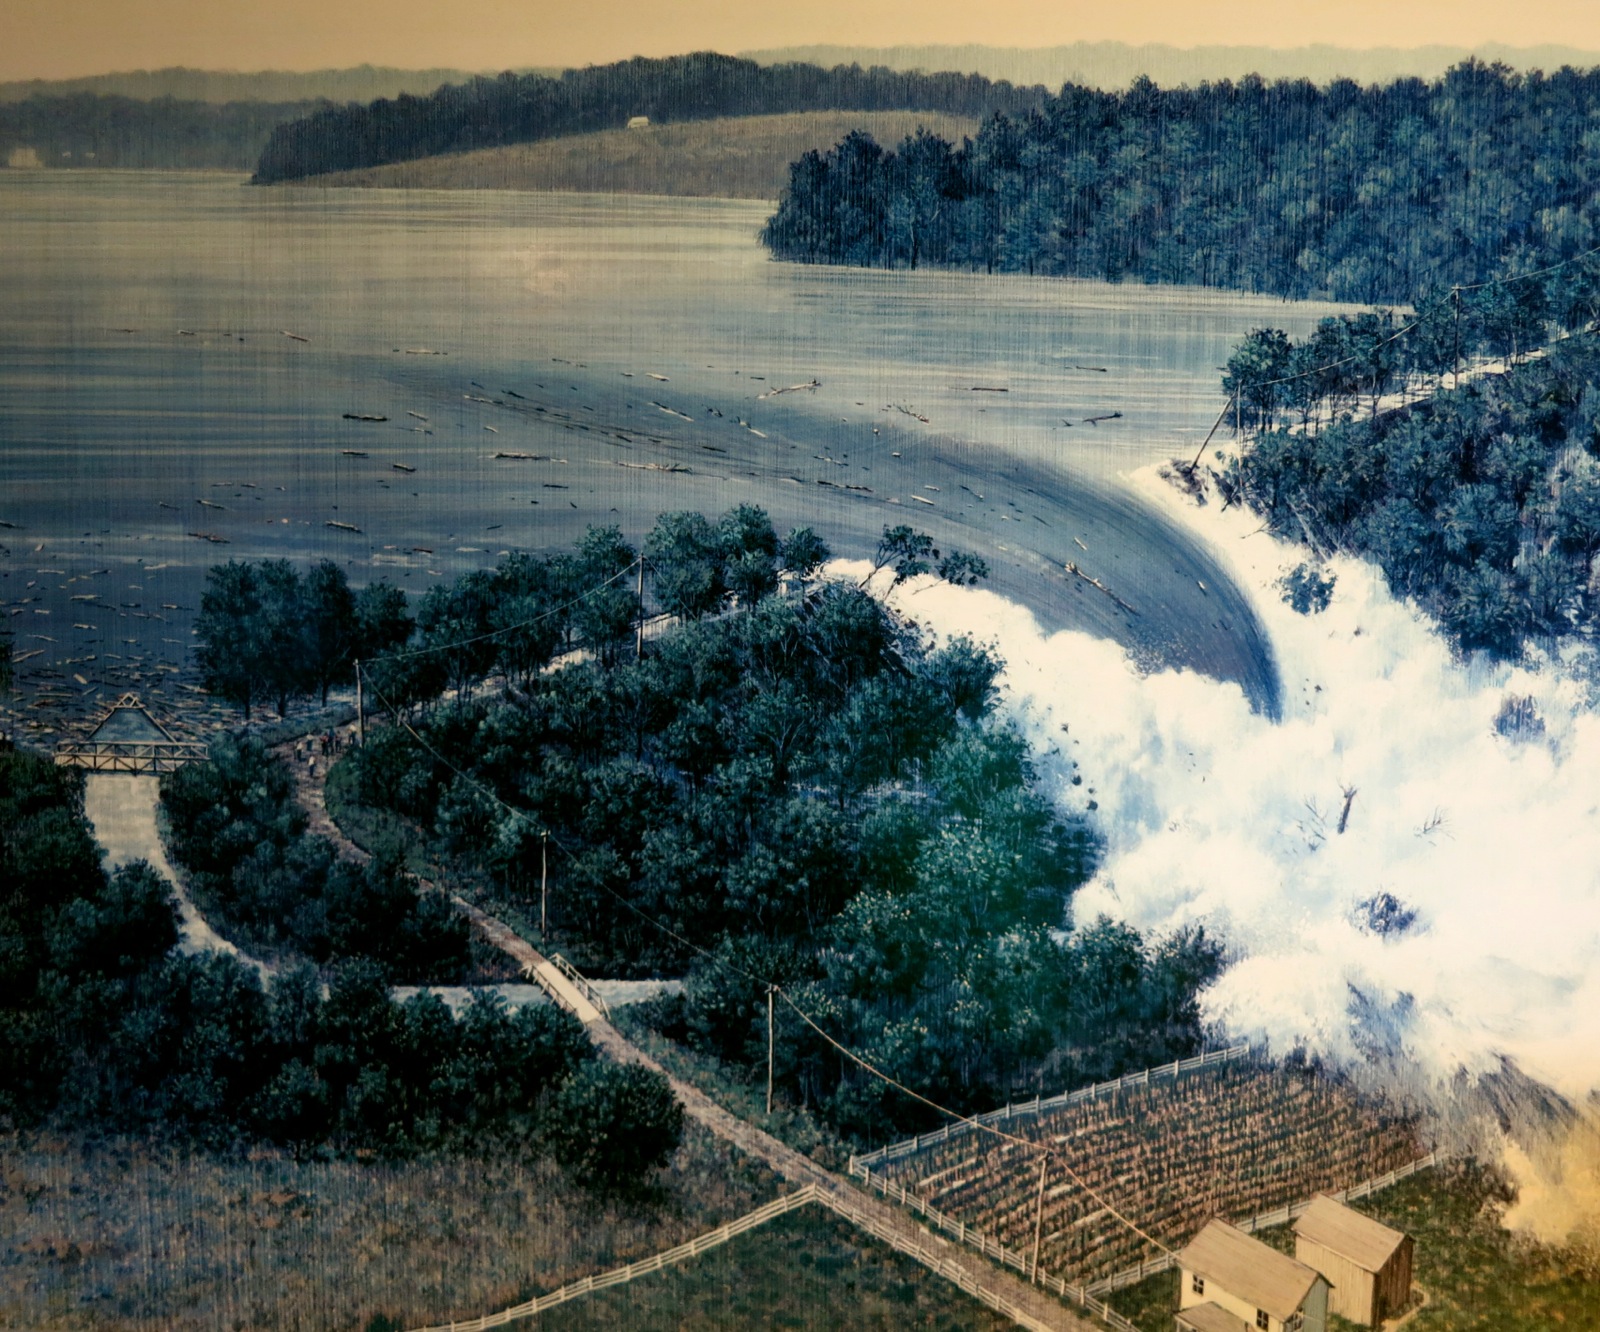 What If Old Hickory Dam Fails?